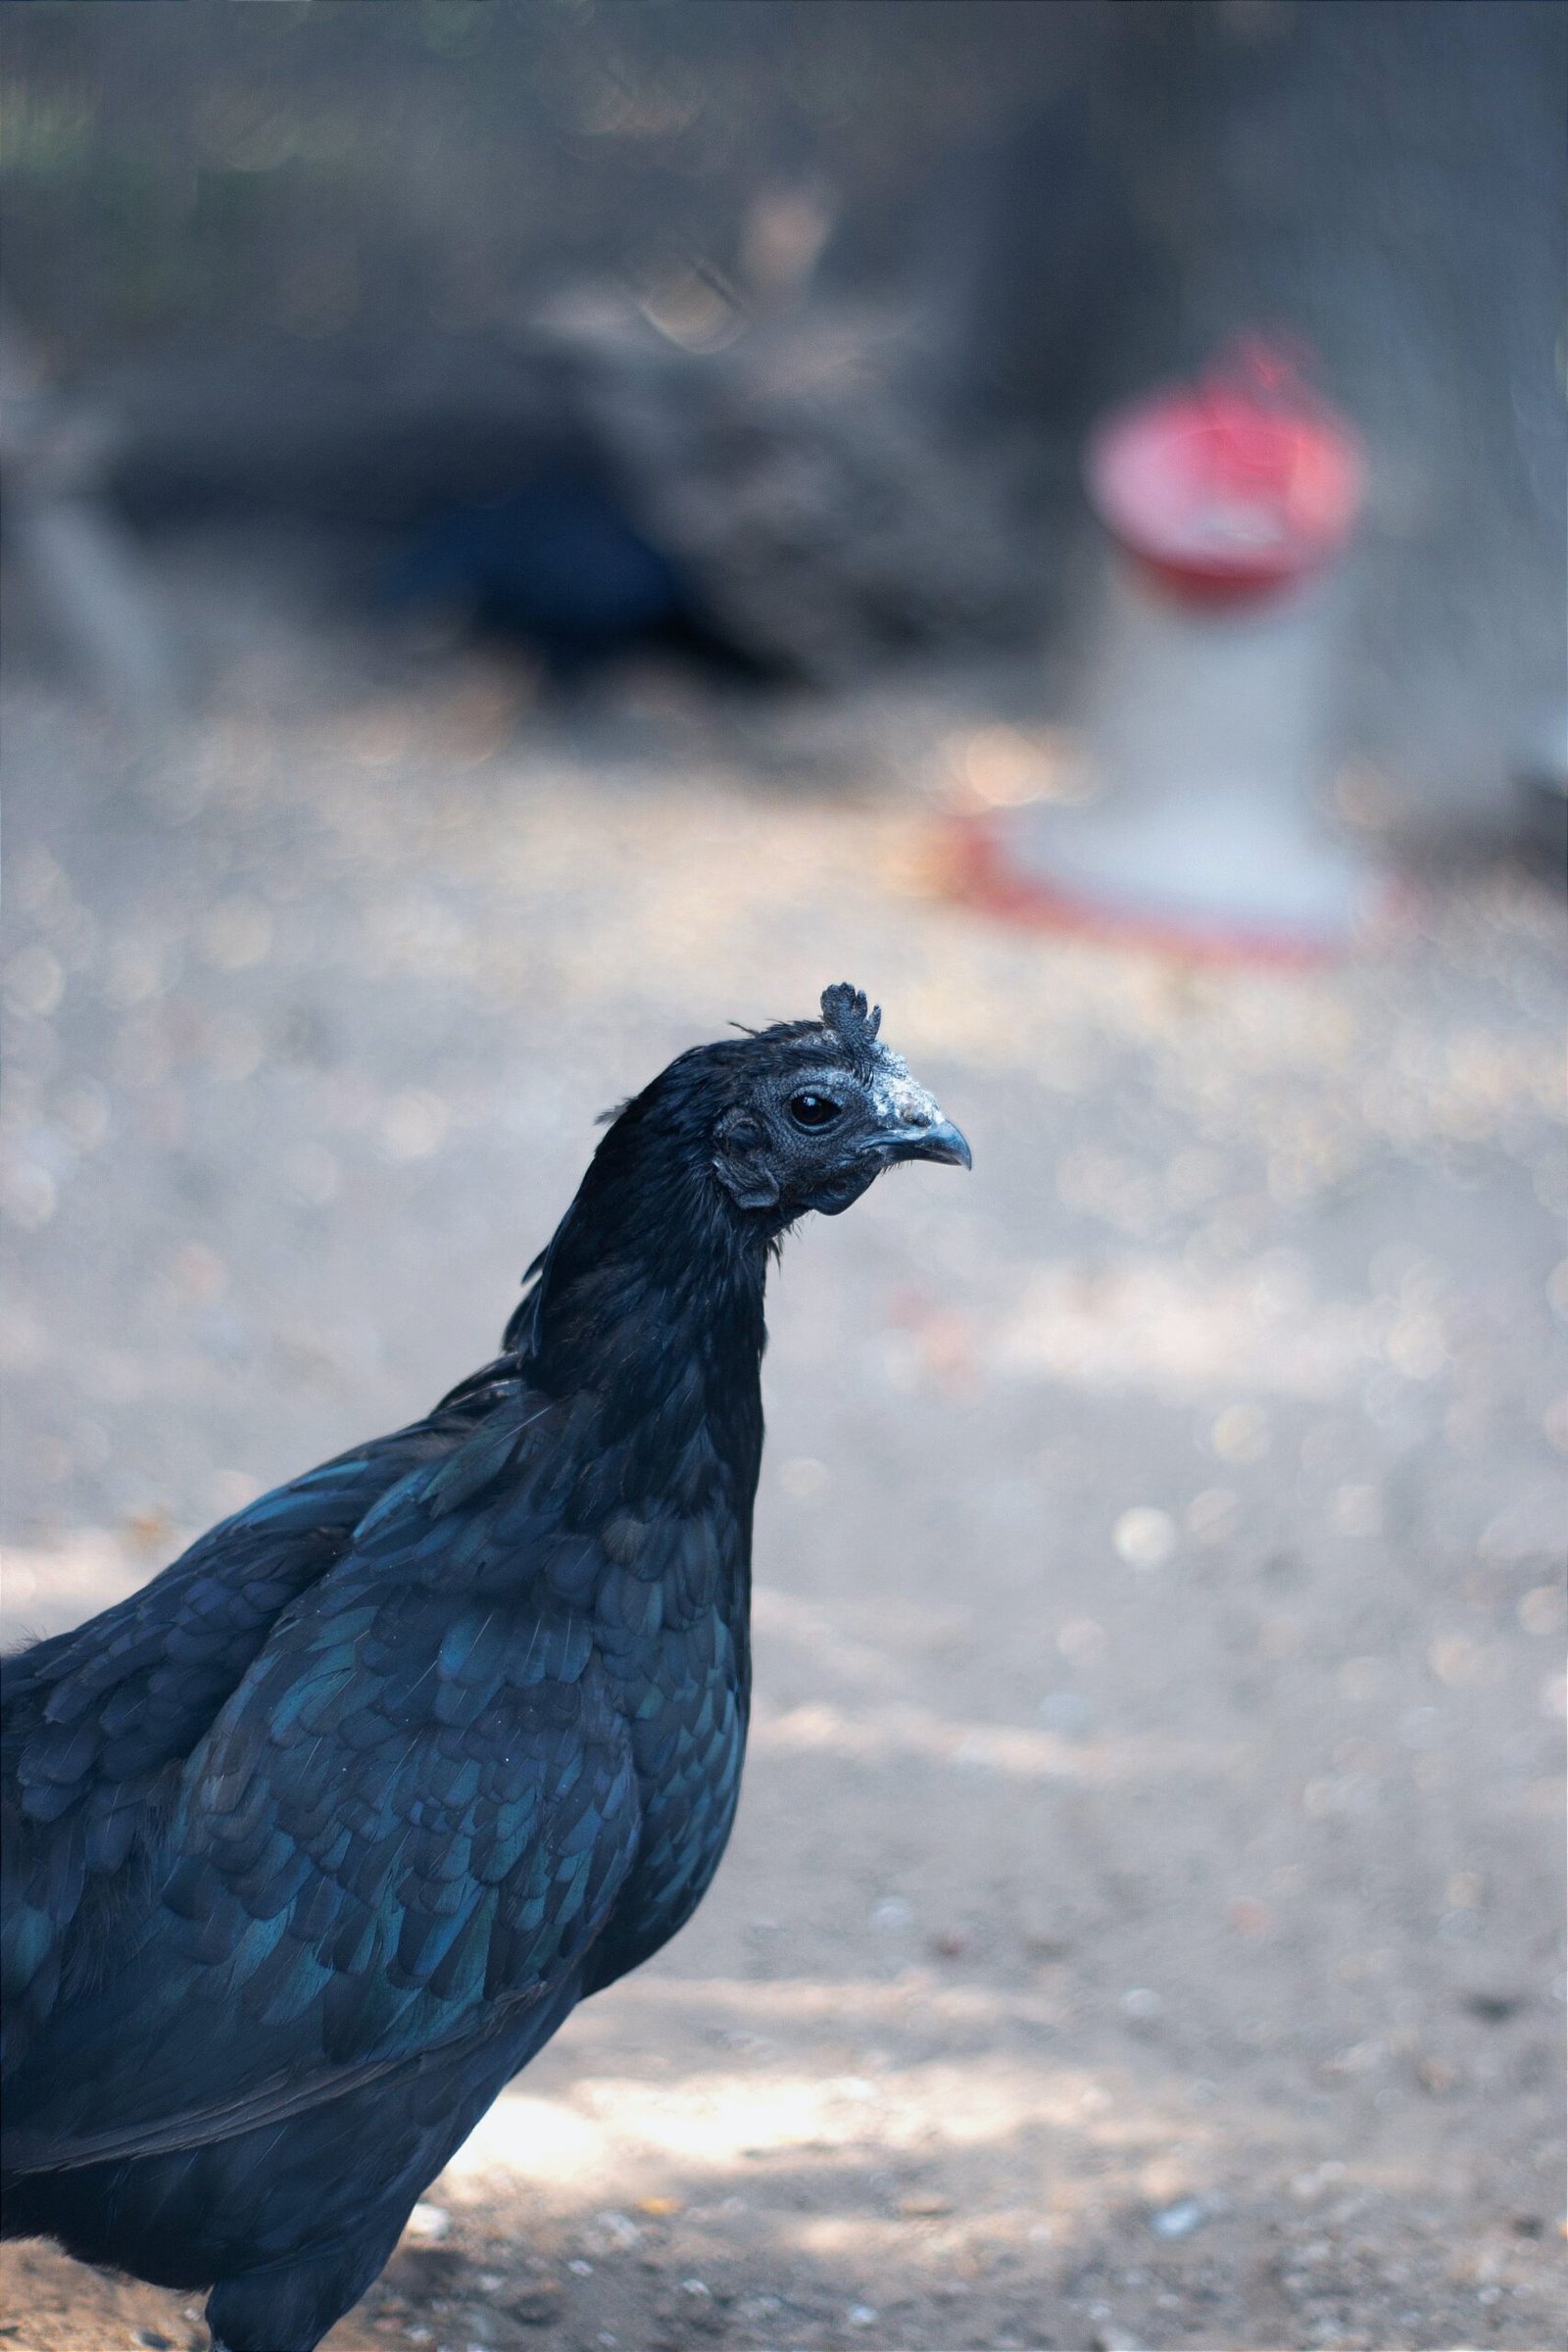 How Do You Choose The Right Breed Of Chickens For Your Needs?